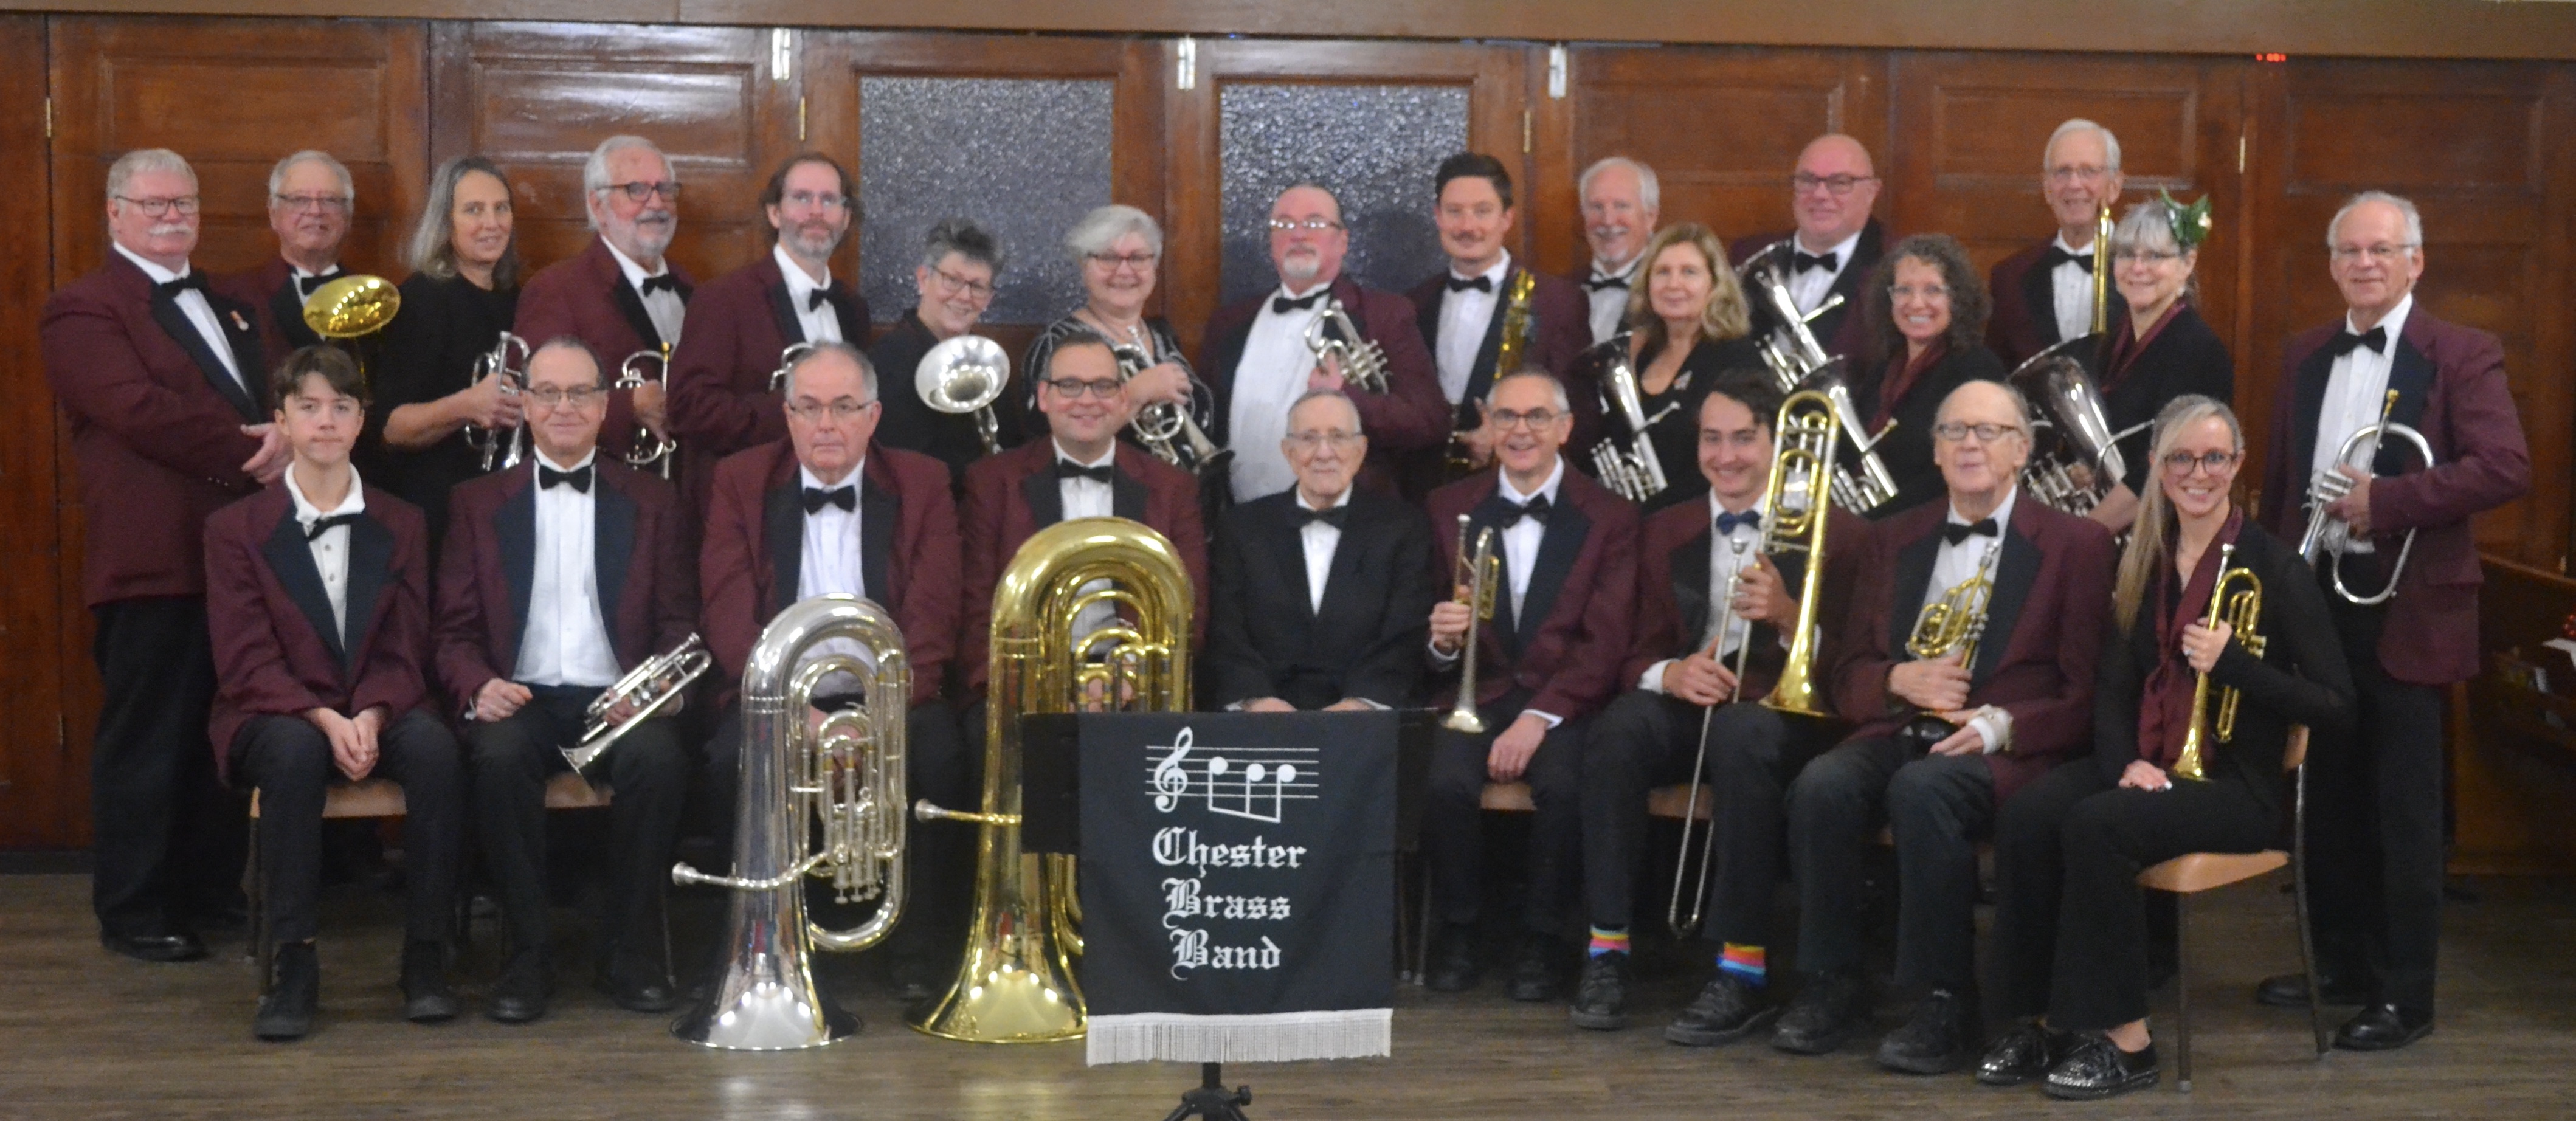 Chester Brass Band  Making music since 1873